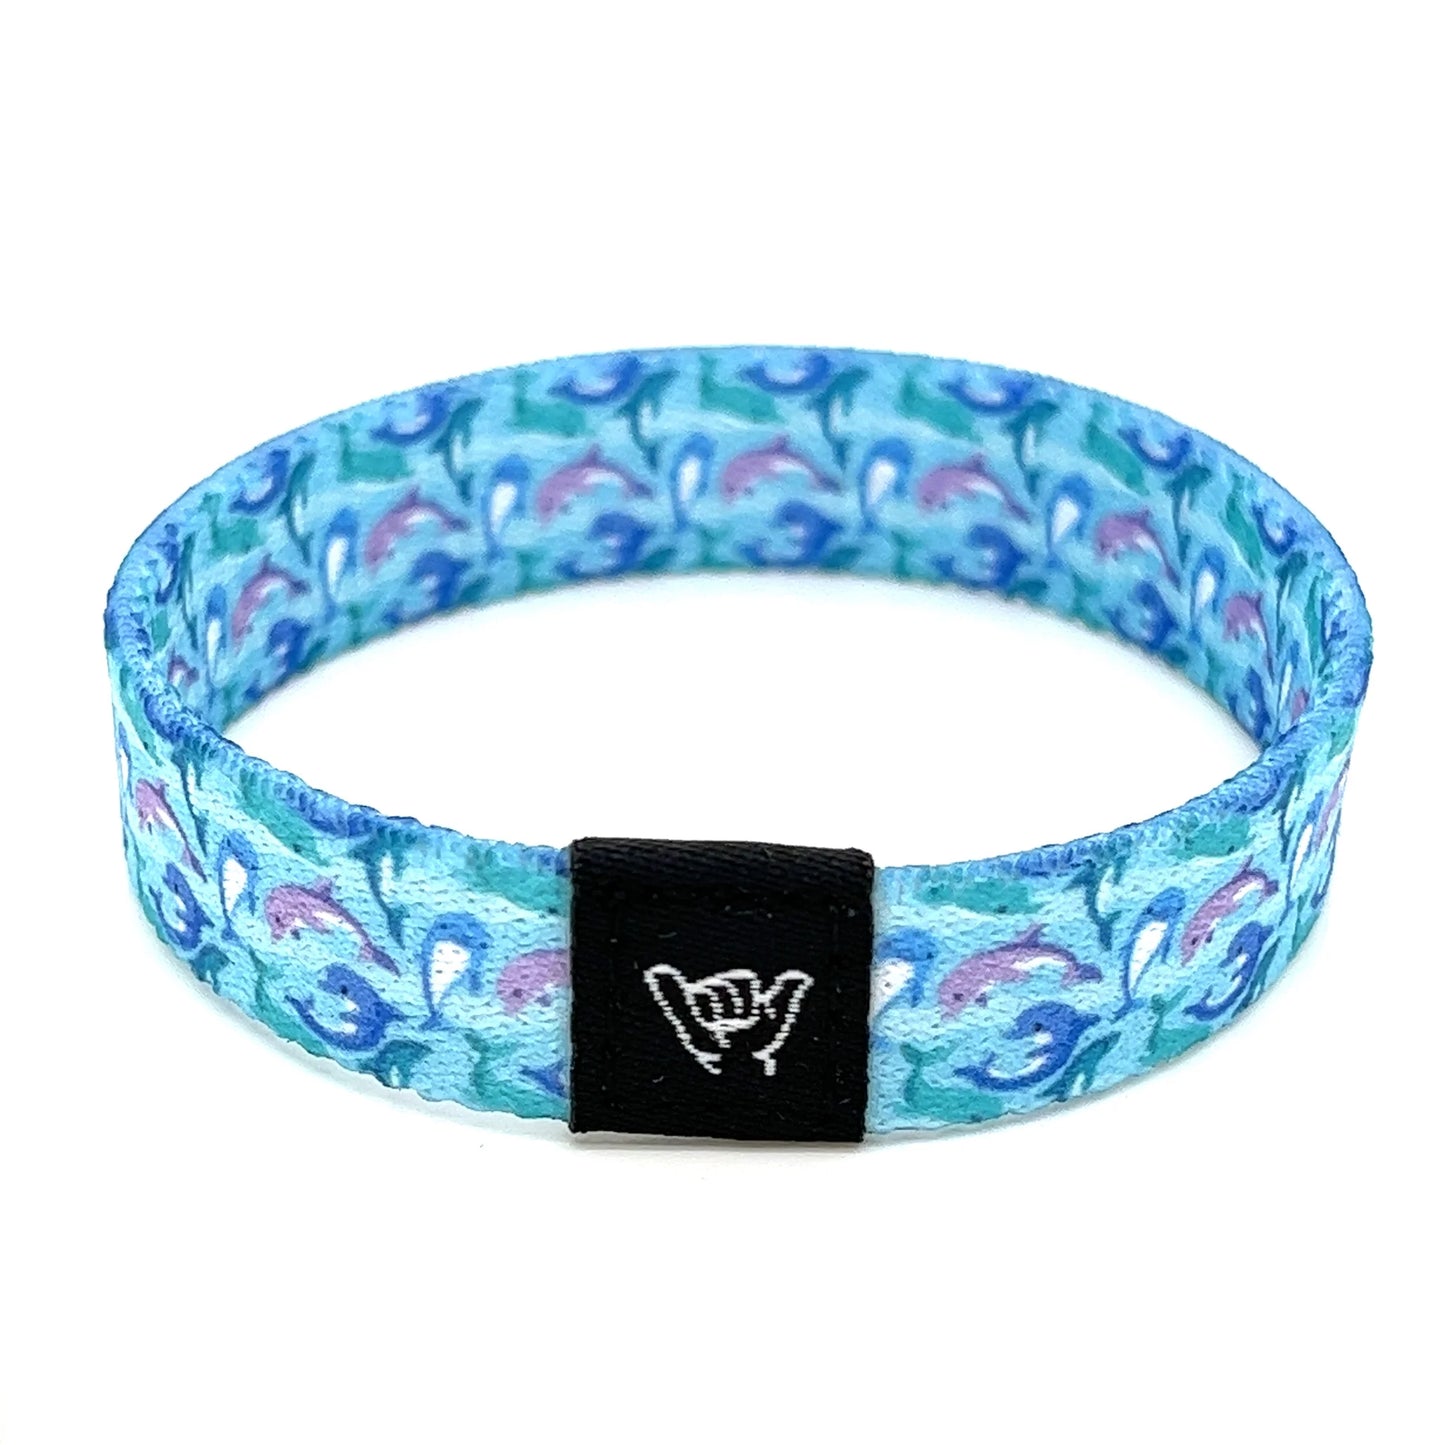 Leaping Dolphins Wristband Bracelet